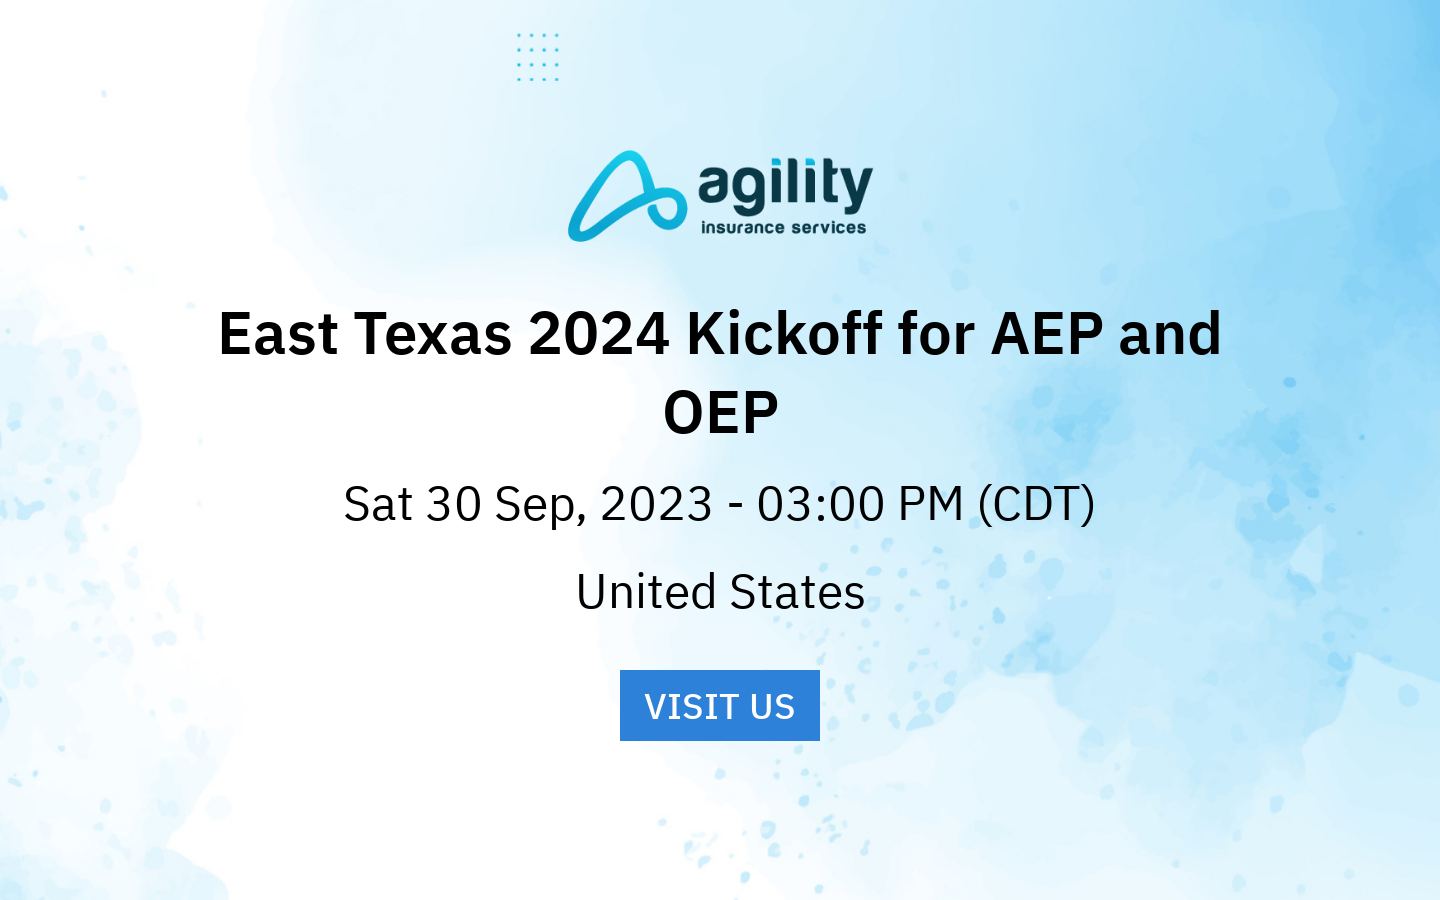 East Texas 2024 Kickoff for AEP and OEP